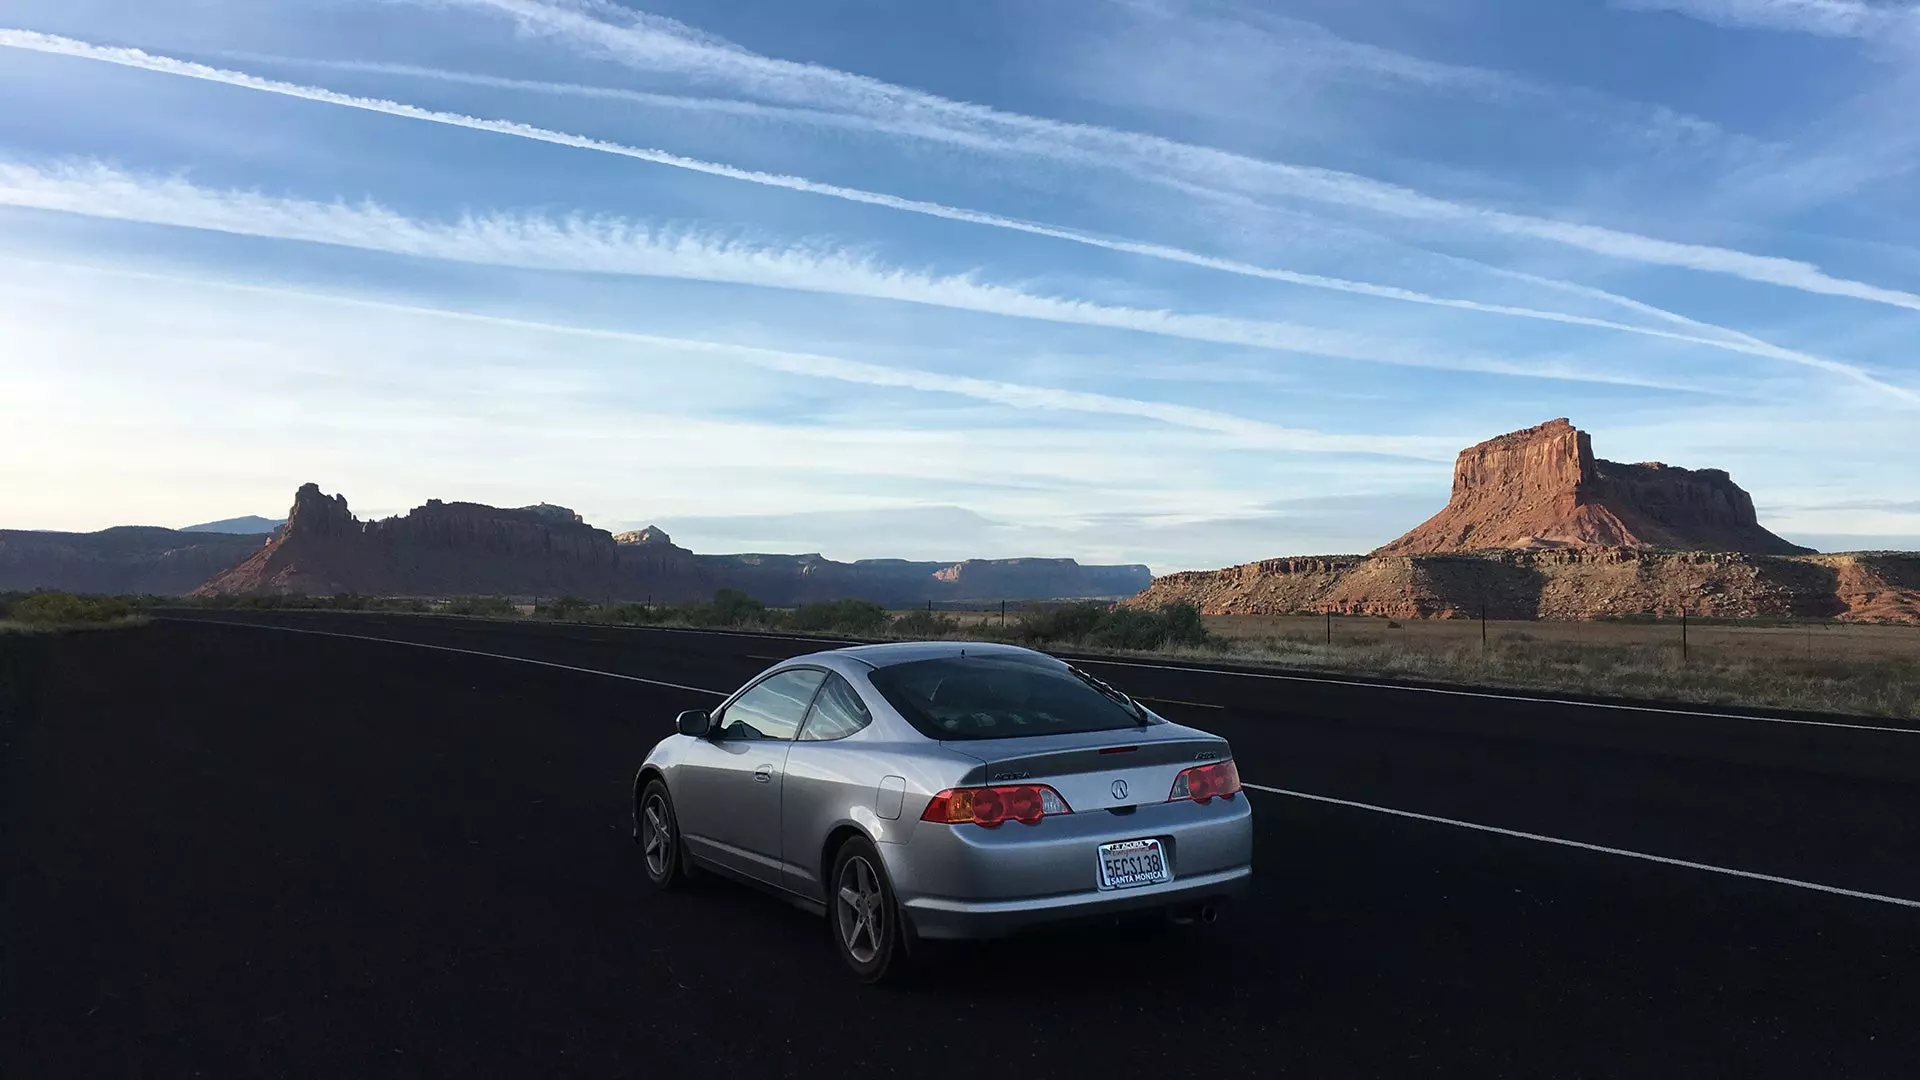 A Desert Drive Can Clear The Mind and Settle The Heart | Autance